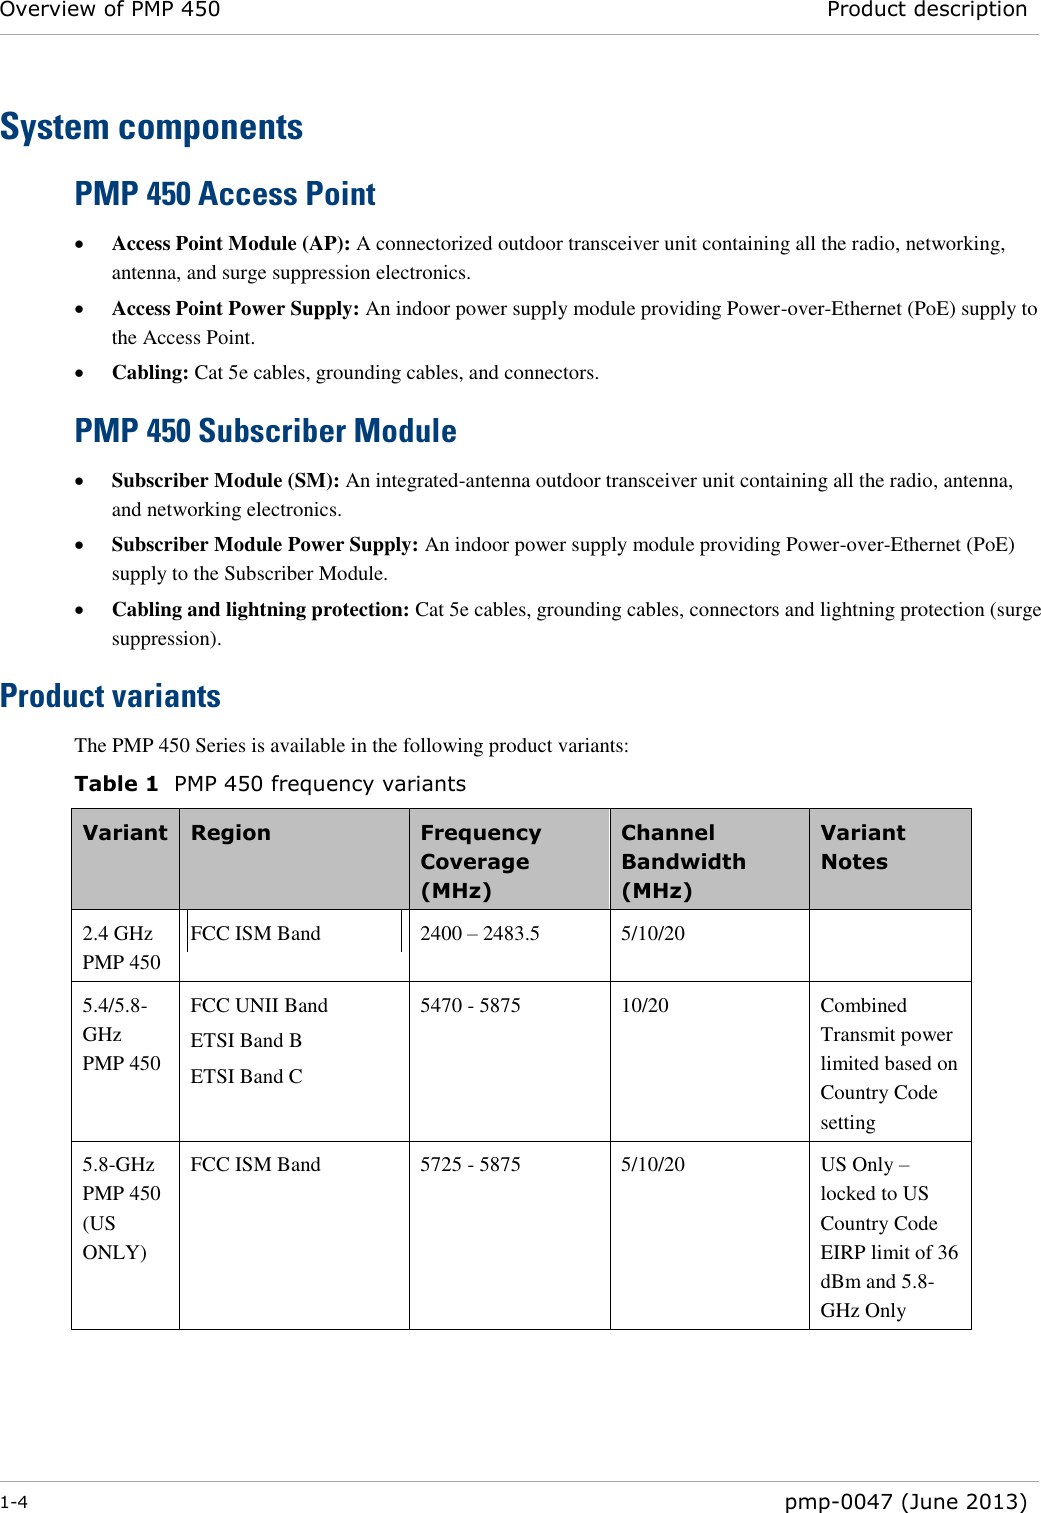 Overview of PMP 450 Product description  1-4  pmp-0047 (June 2013)  System components PMP 450 Access Point  Access Point Module (AP): A connectorized outdoor transceiver unit containing all the radio, networking, antenna, and surge suppression electronics.  Access Point Power Supply: An indoor power supply module providing Power-over-Ethernet (PoE) supply to the Access Point.  Cabling: Cat 5e cables, grounding cables, and connectors. PMP 450 Subscriber Module  Subscriber Module (SM): An integrated-antenna outdoor transceiver unit containing all the radio, antenna, and networking electronics.  Subscriber Module Power Supply: An indoor power supply module providing Power-over-Ethernet (PoE) supply to the Subscriber Module.  Cabling and lightning protection: Cat 5e cables, grounding cables, connectors and lightning protection (surge suppression). Product variants The PMP 450 Series is available in the following product variants: Table 1  PMP 450 frequency variants Variant Region Frequency Coverage (MHz) Channel Bandwidth (MHz) Variant Notes 2.4 GHz PMP 450 FCC ISM Band 2400 – 2483.5 5/10/20  5.4/5.8-GHz PMP 450 FCC UNII Band ETSI Band B ETSI Band C 5470 - 5875 10/20 Combined Transmit power limited based on Country Code setting 5.8-GHz PMP 450 (US ONLY) FCC ISM Band 5725 - 5875 5/10/20 US Only – locked to US Country Code EIRP limit of 36 dBm and 5.8-GHz Only  